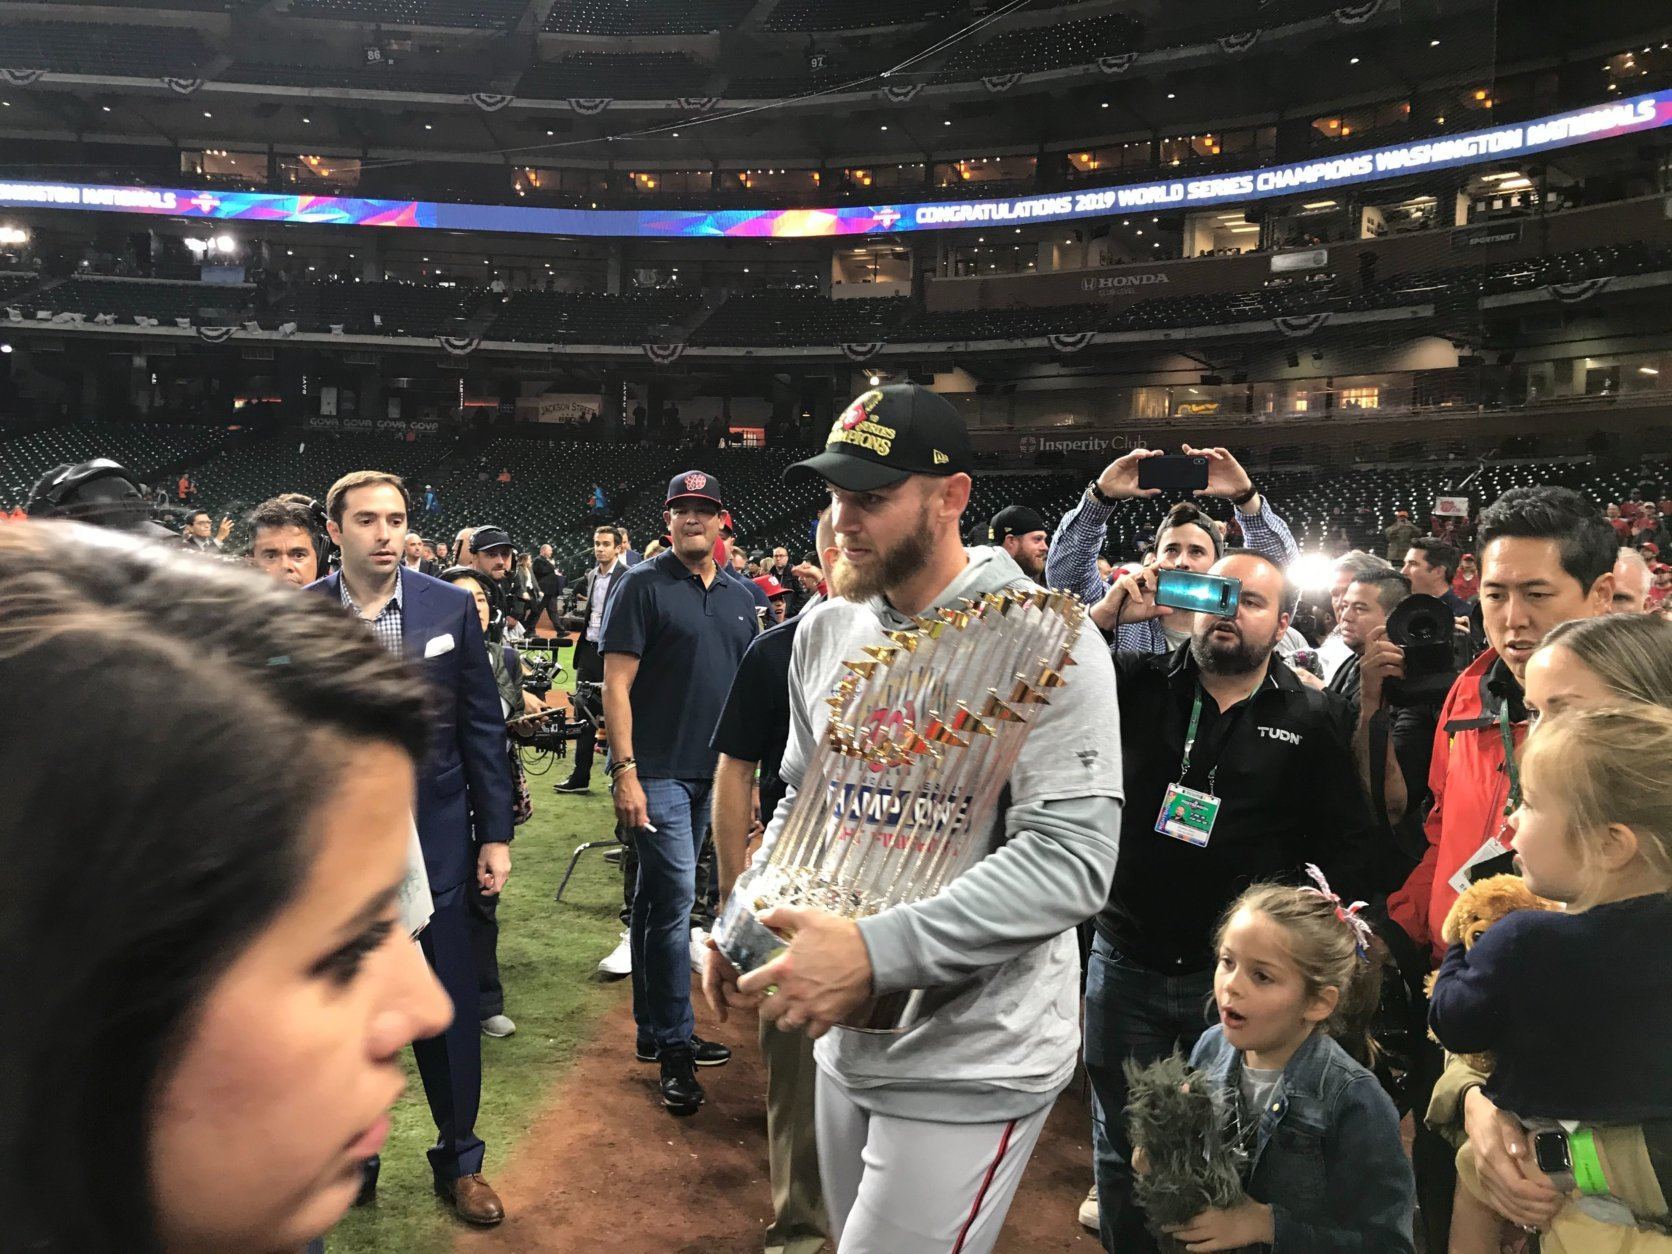 One of my favorite photos from the 2019 World Series run. Congrats